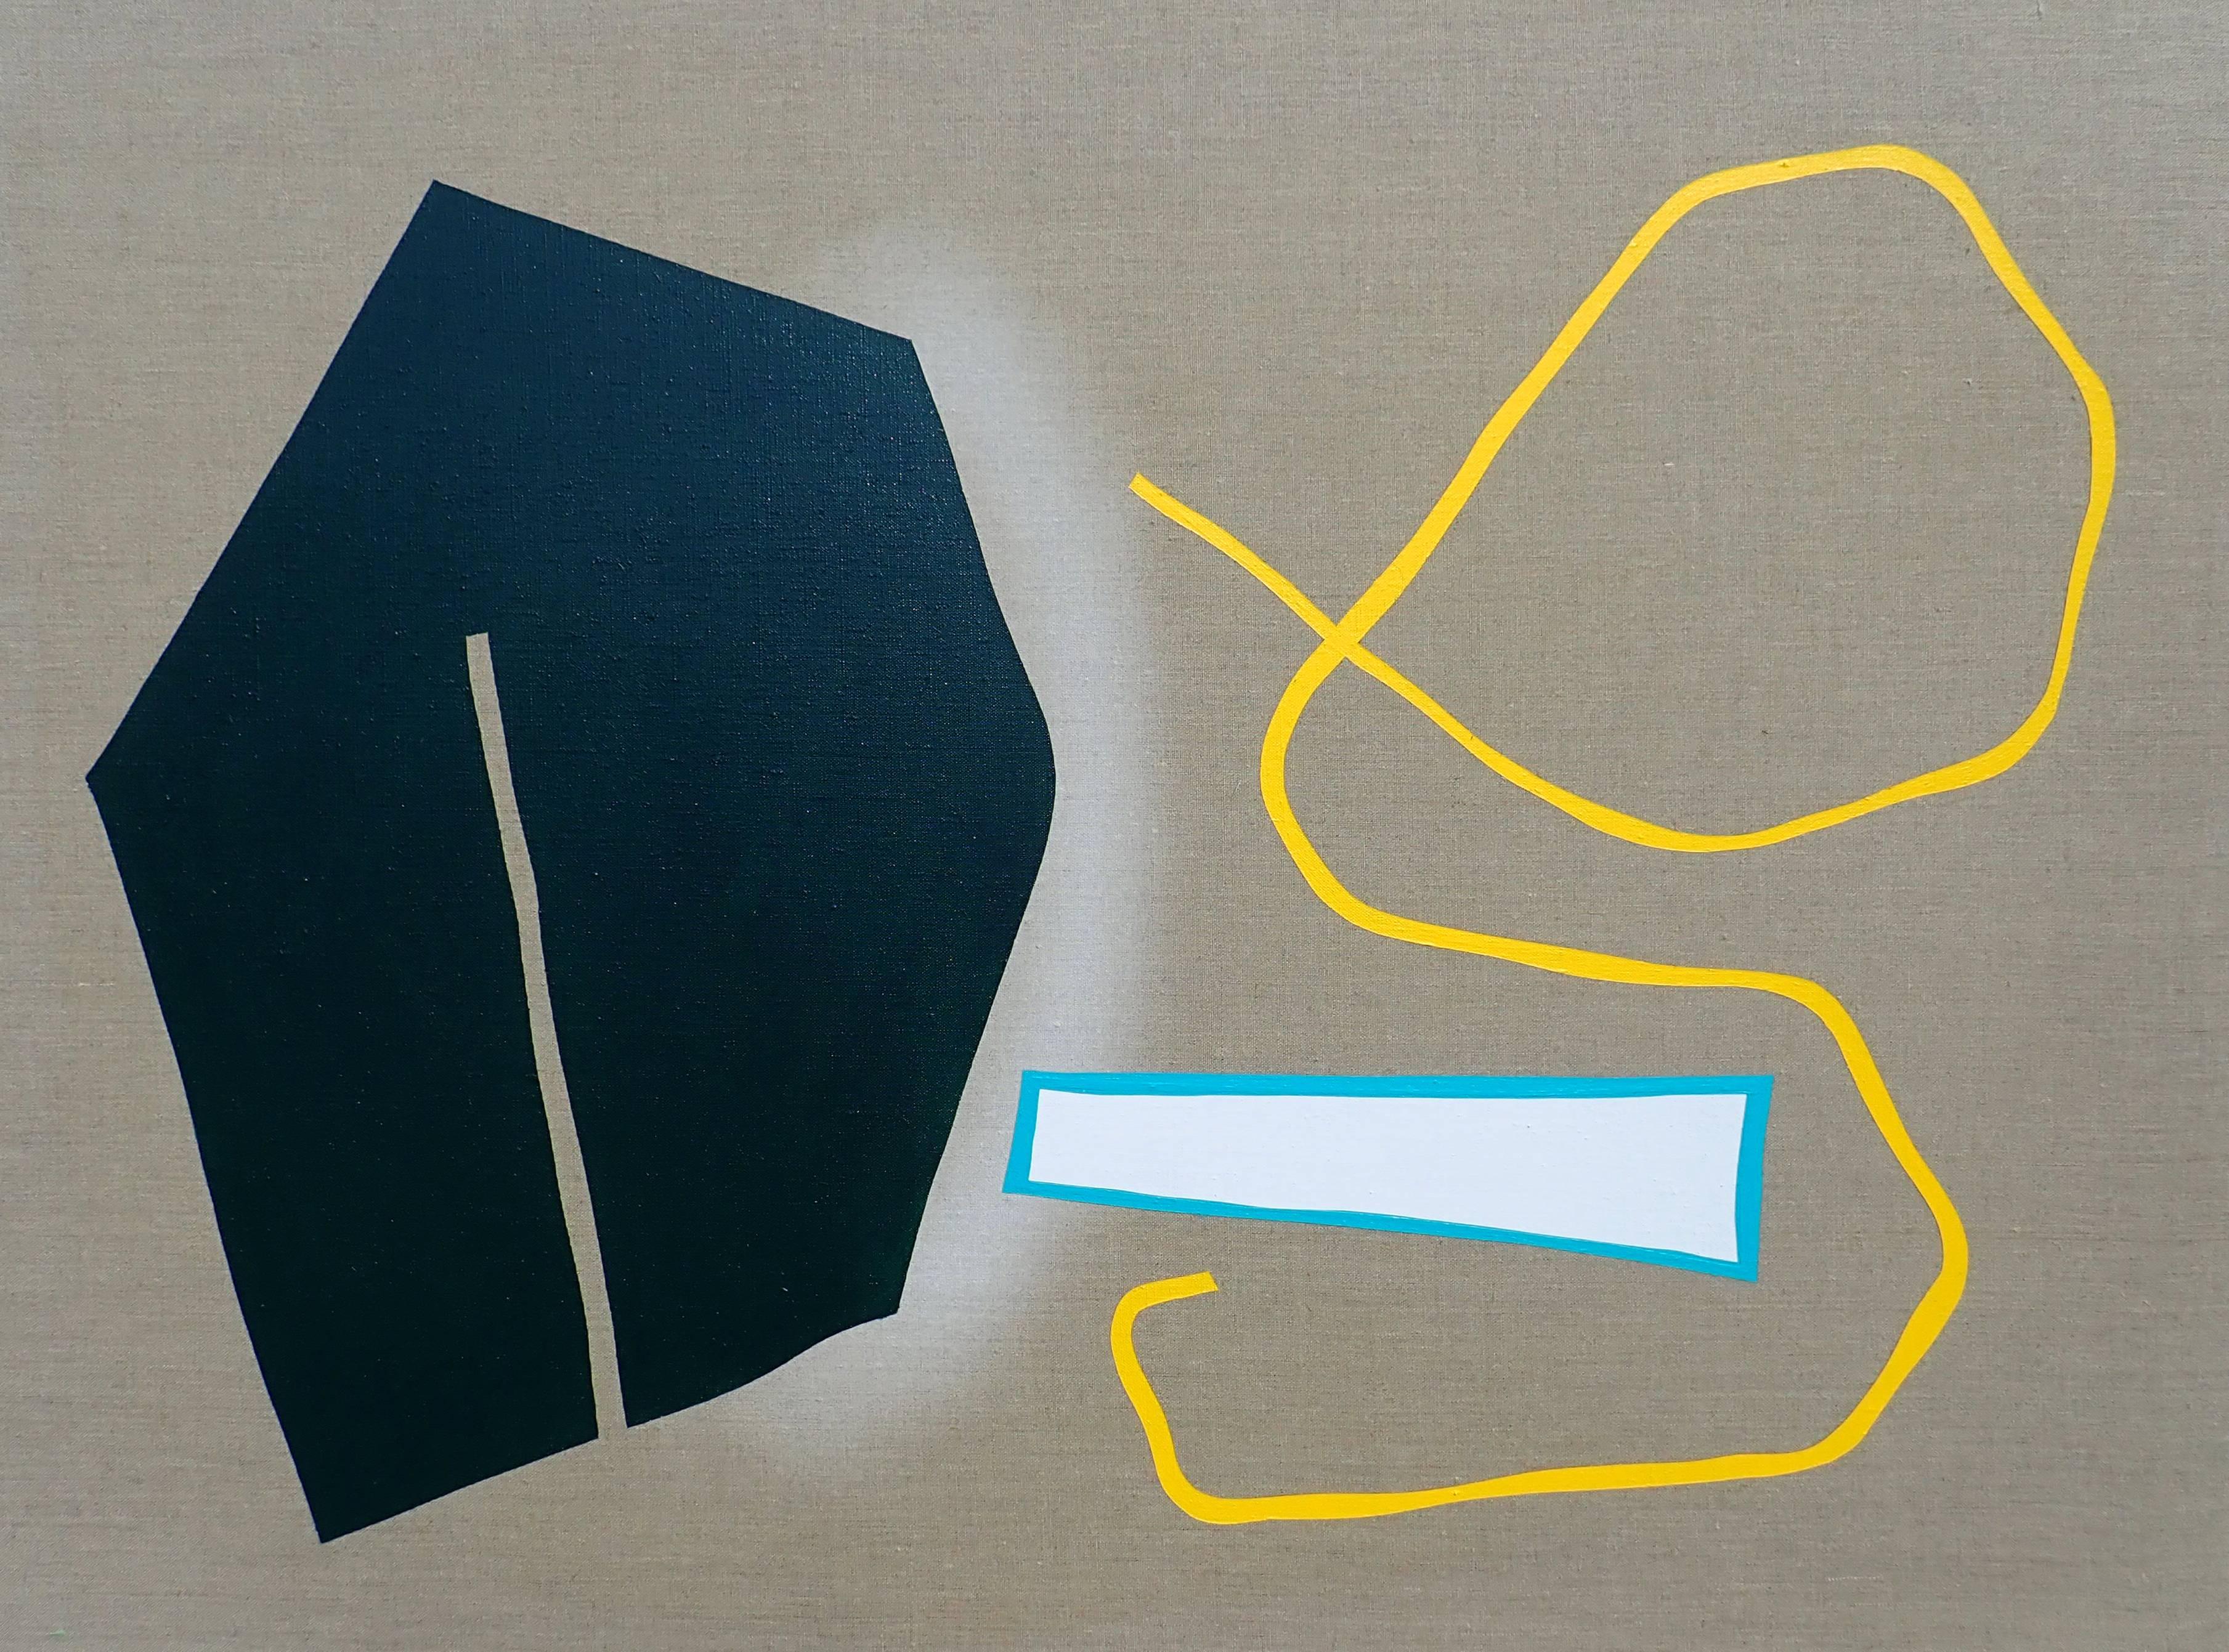 Aron Hill Abstract Painting - Split Green Shape with Long Yellow Line - colorful, abstract shapes on canvas